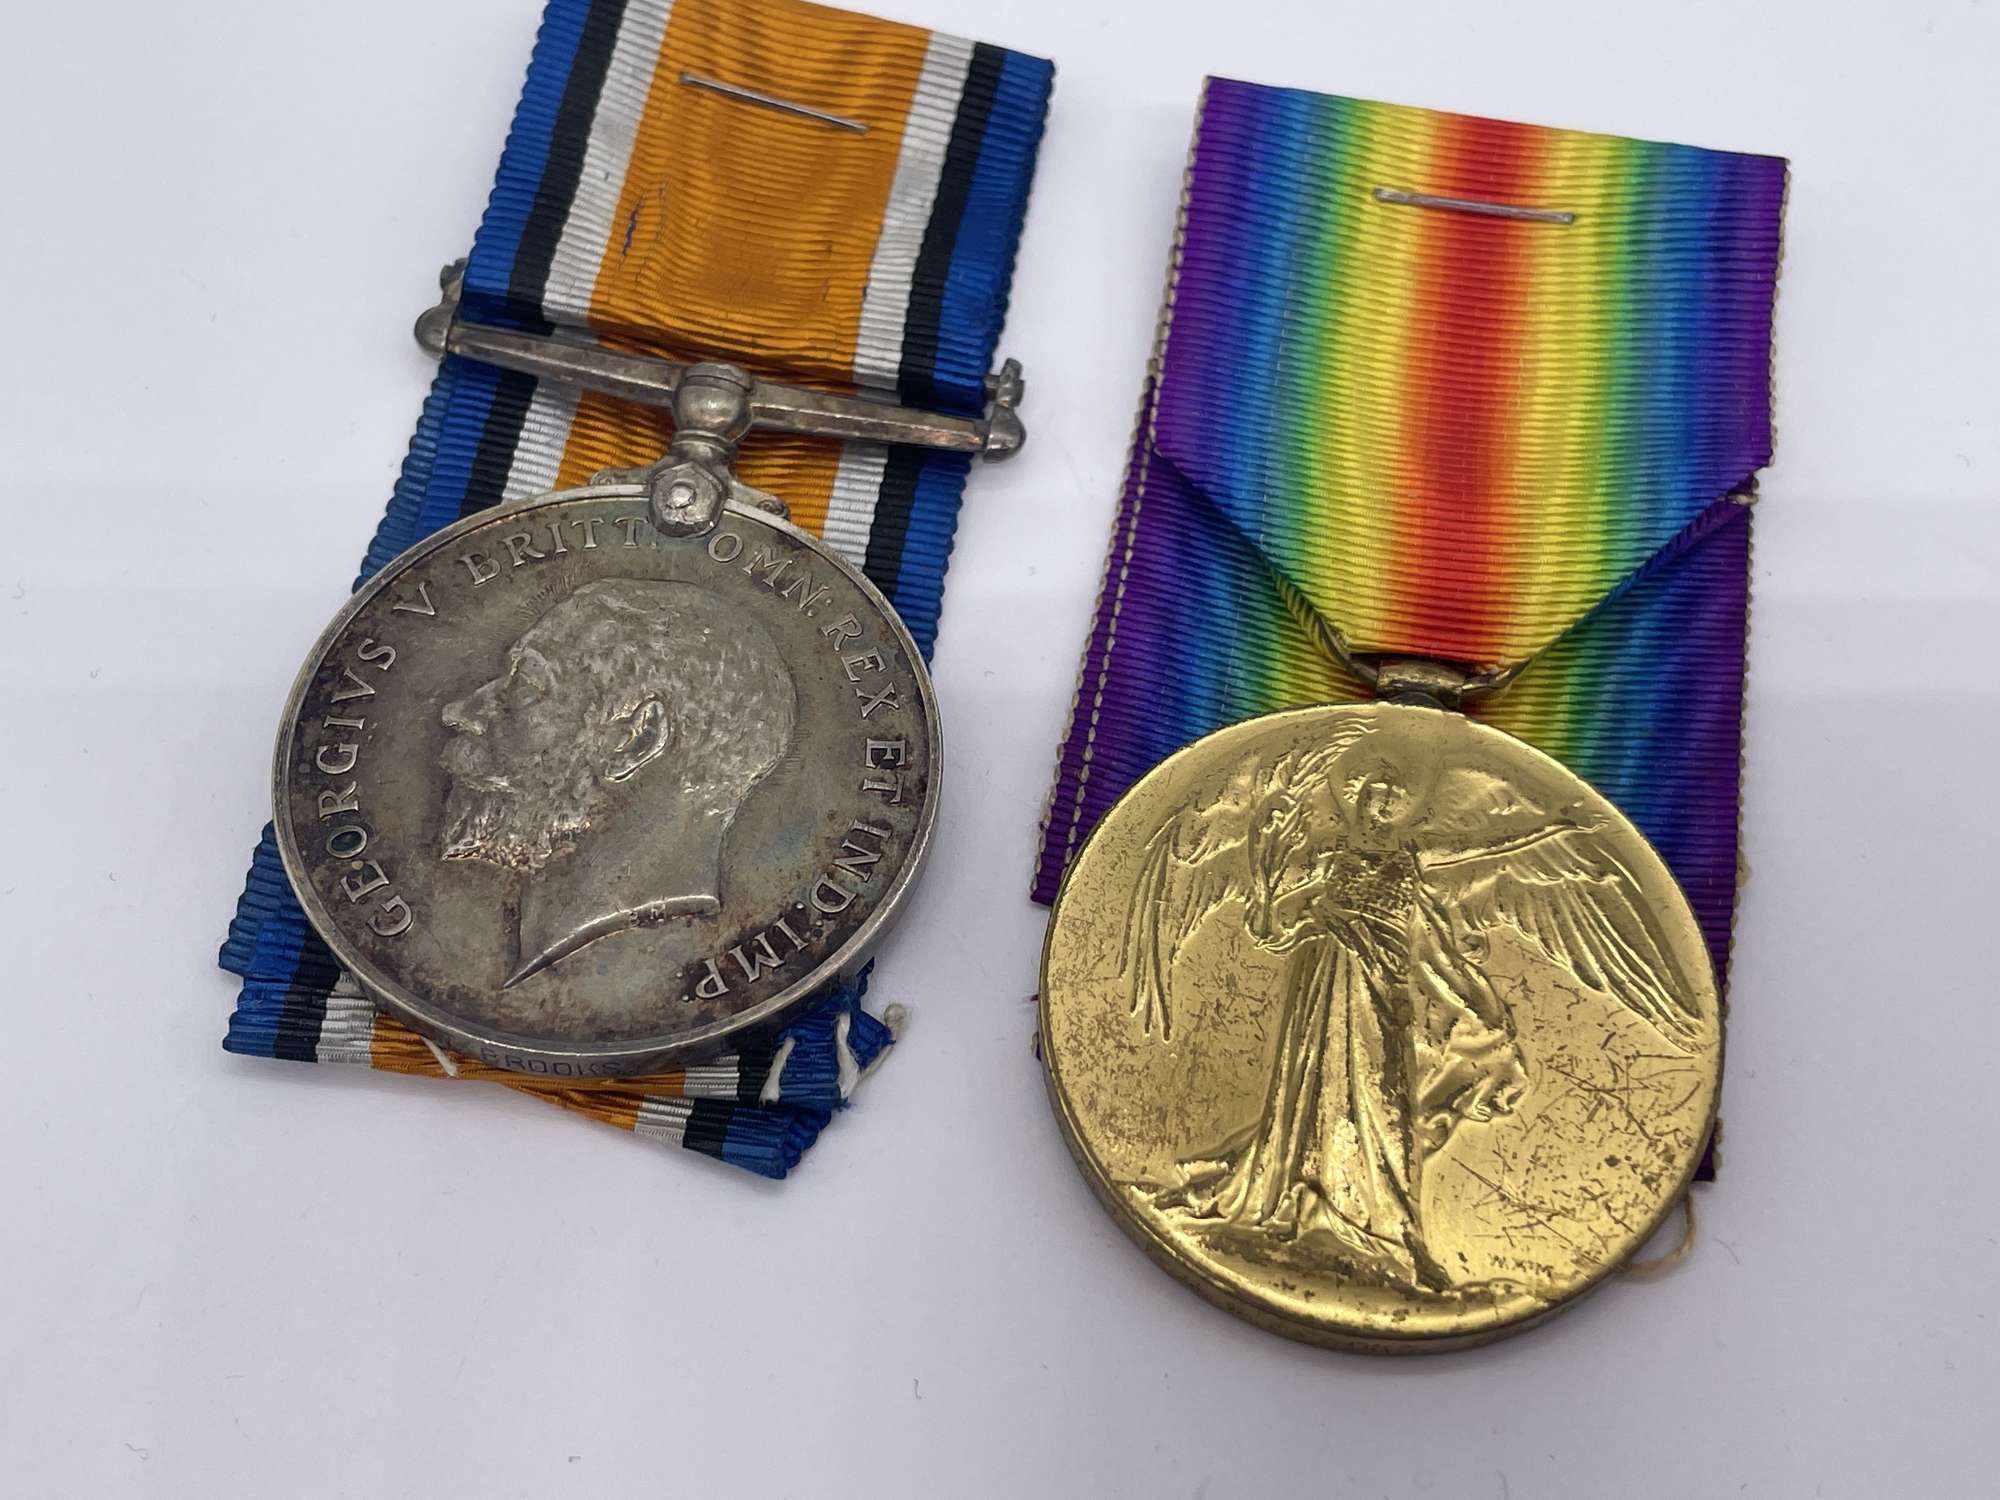 Original WW1 Medal Pair, Pte Brookes, 2nd London Regiment, Killed in Action on t